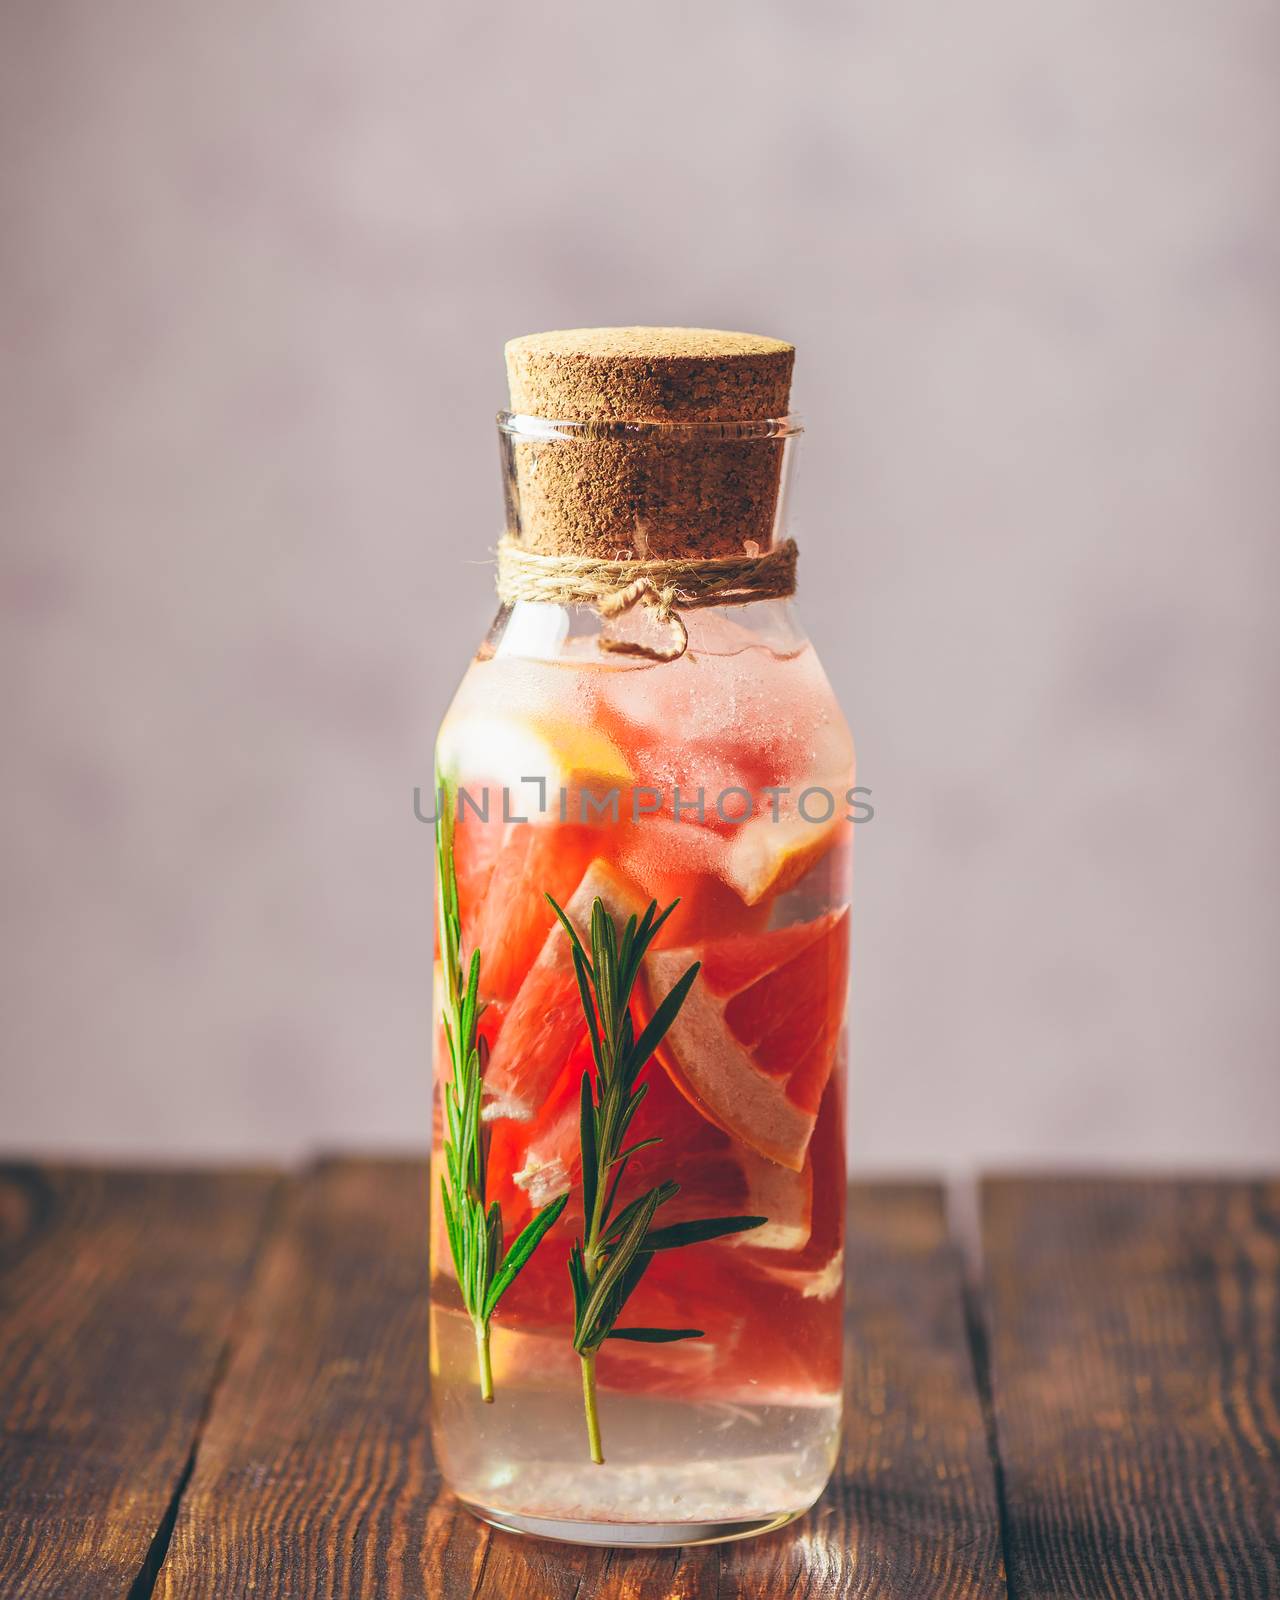 Bottle of Detox Water Infused with Sliced Raw Grapefruit and Fresh Springs of Rosemary. Vertical Orientation. Copy Space on the Top.